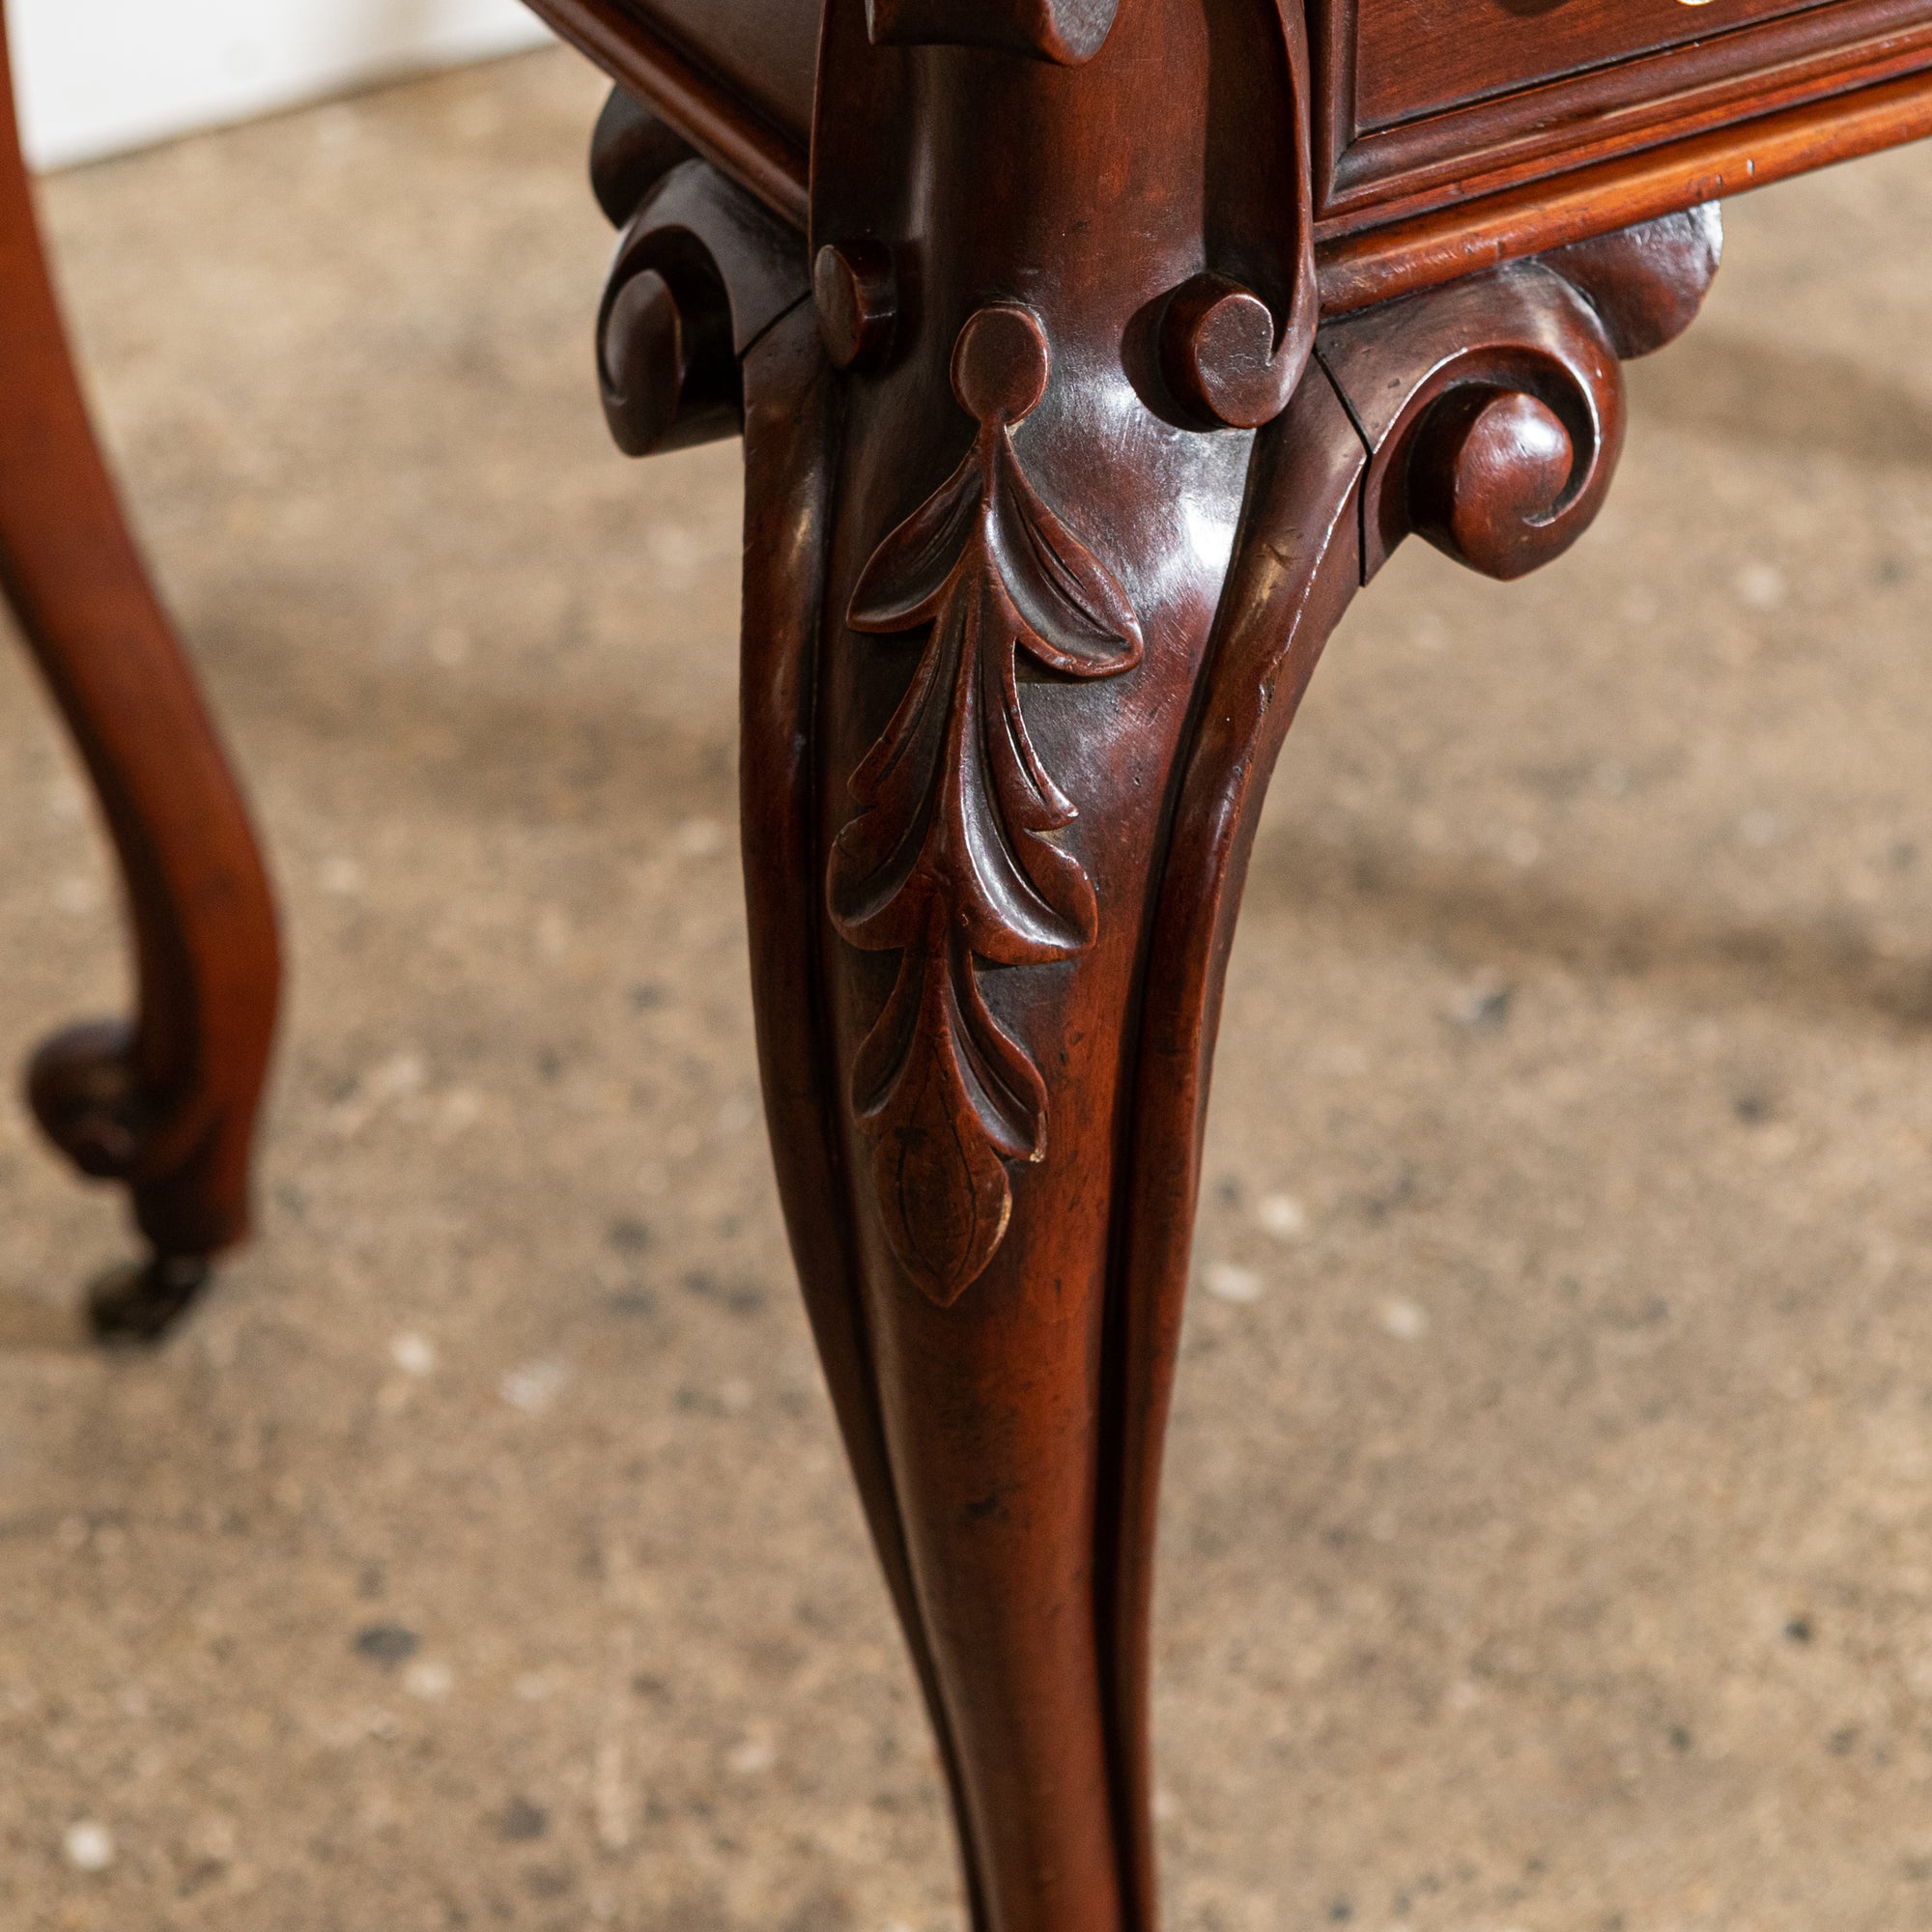 Antique Victorian Mahogany Writing Desk | The Architectural Forum